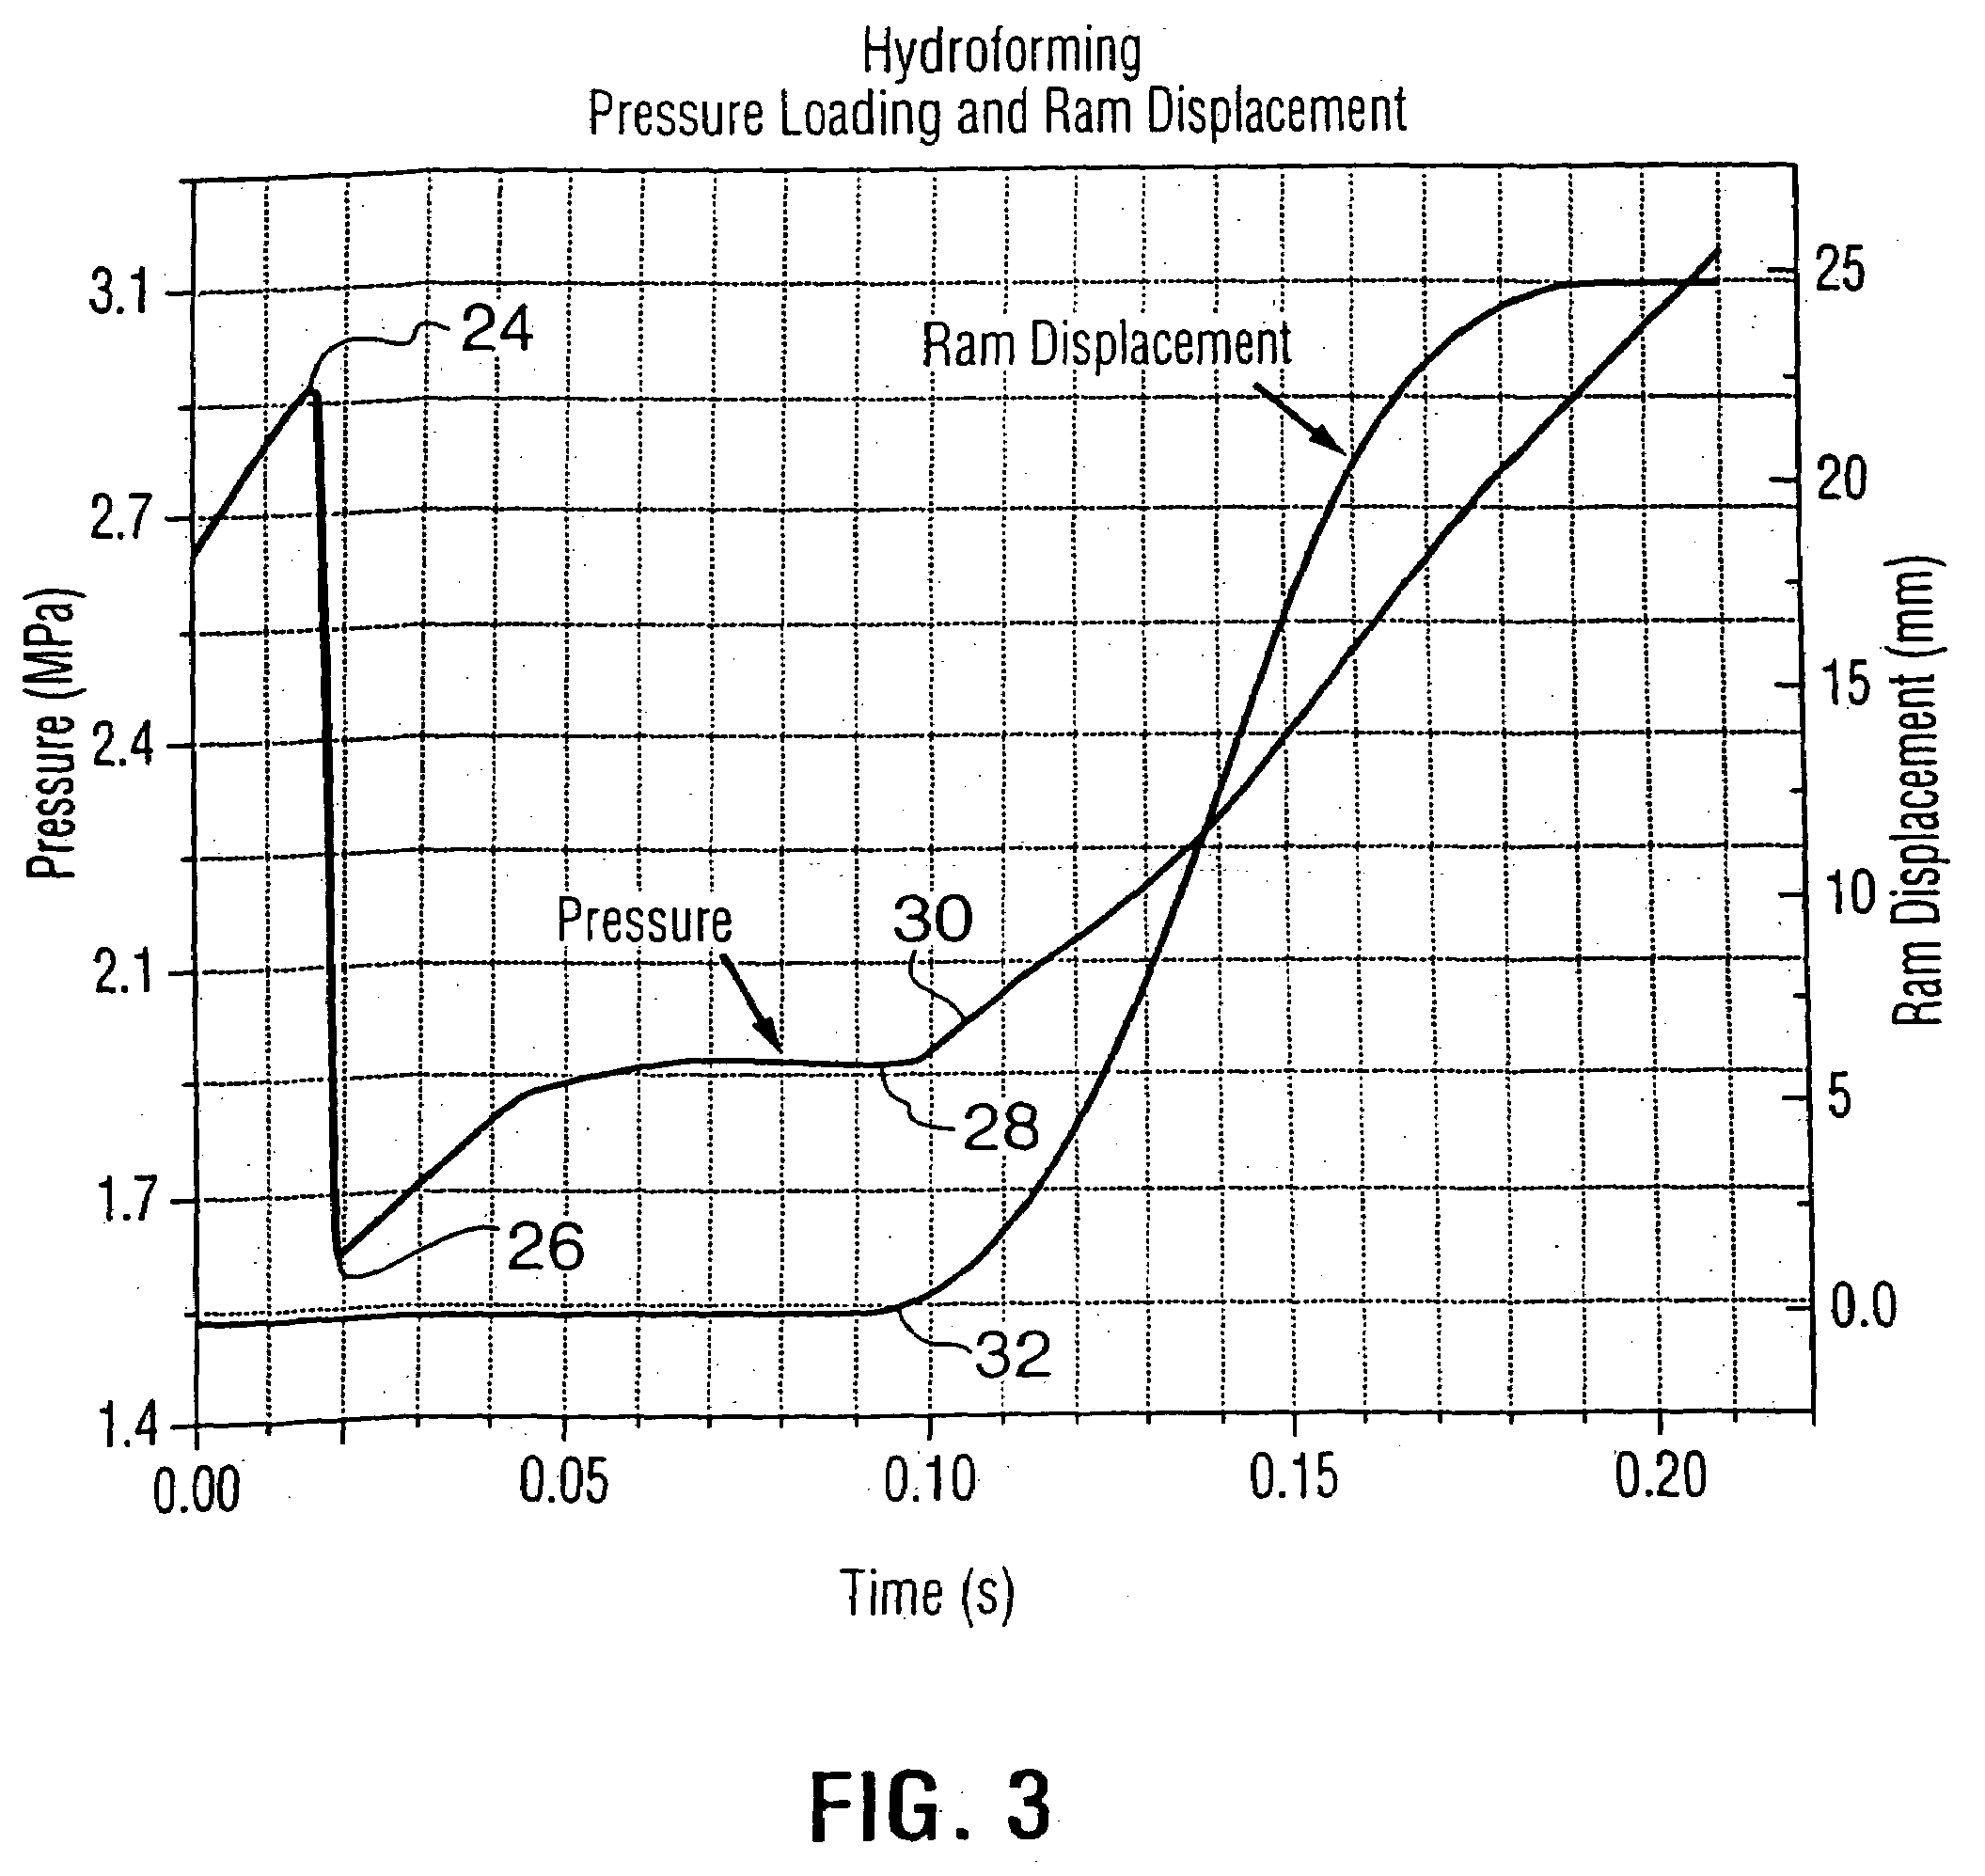 Methods of and apparatus for forming hollow metal articles